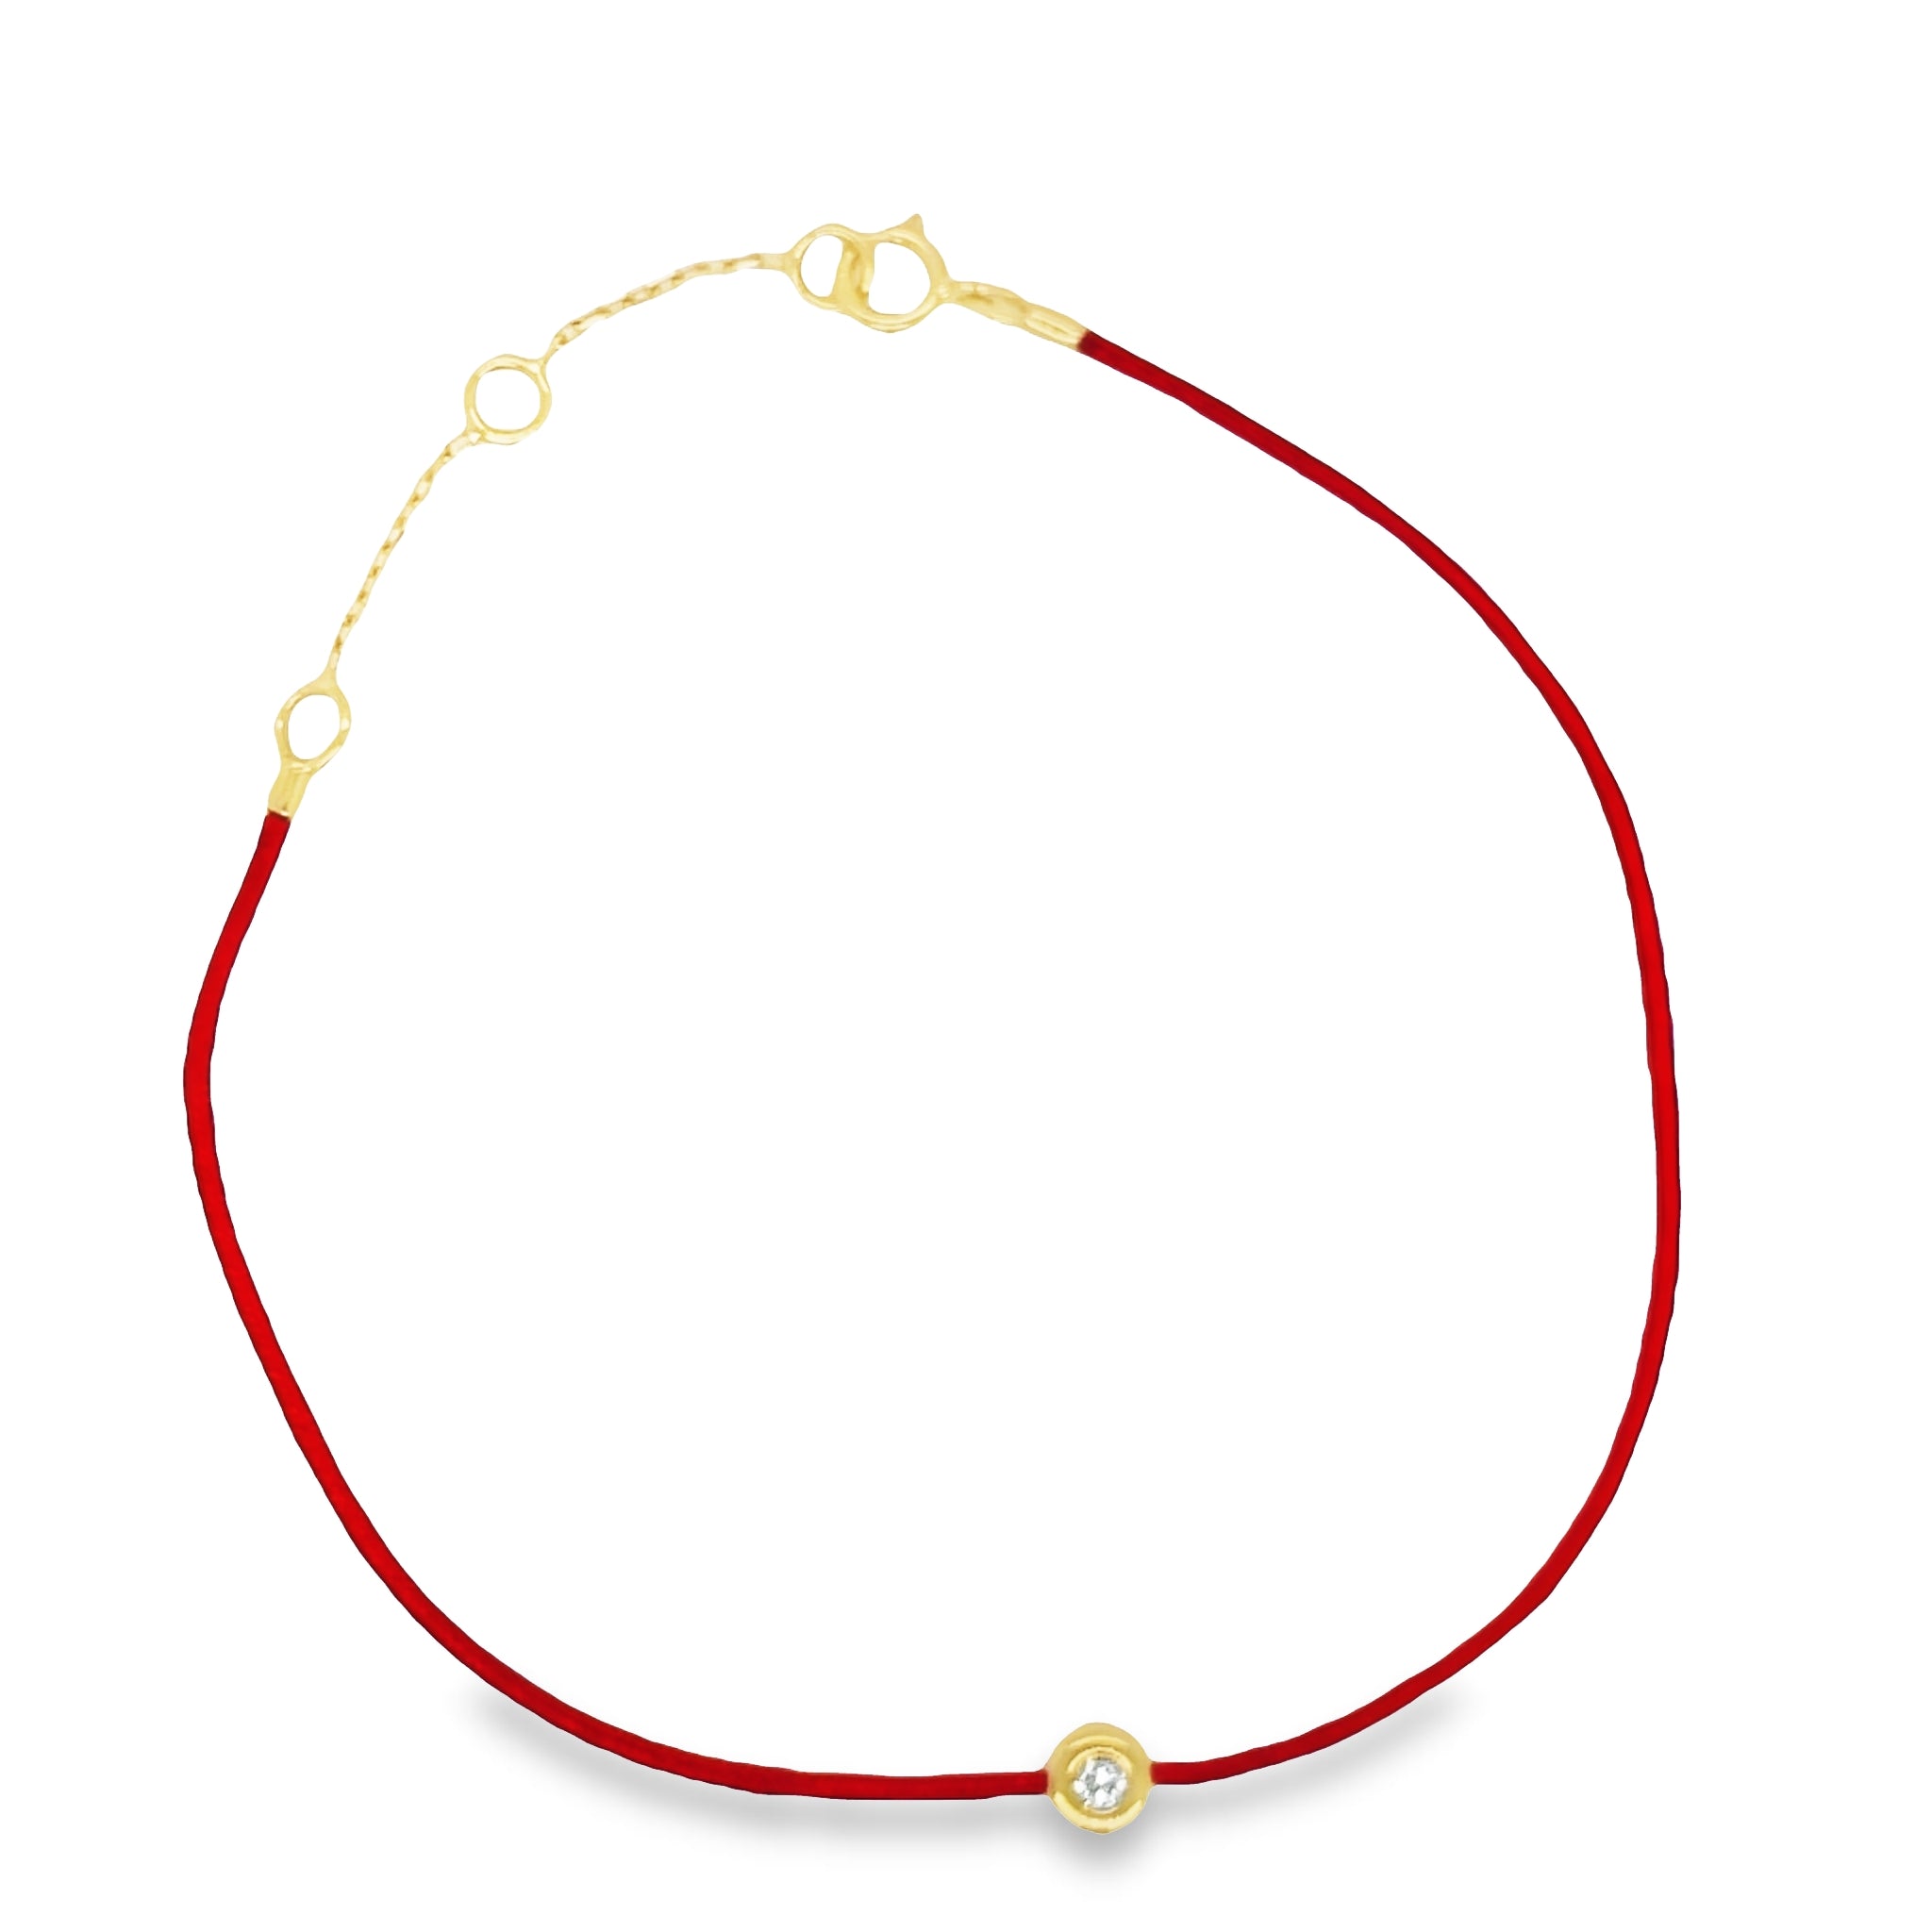 Indulge in the luxurious sparkle of this Dainty Diamond Solitaire Red Silk Bracelet. Boasting a single bezel-set diamond set in 18K golden yellow gold, this adjustable bracelet creates an unforgettable look. The adjustable silk cord ensures a perfect fit every time. Enjoy the shimmer and shine of this lavish piece.